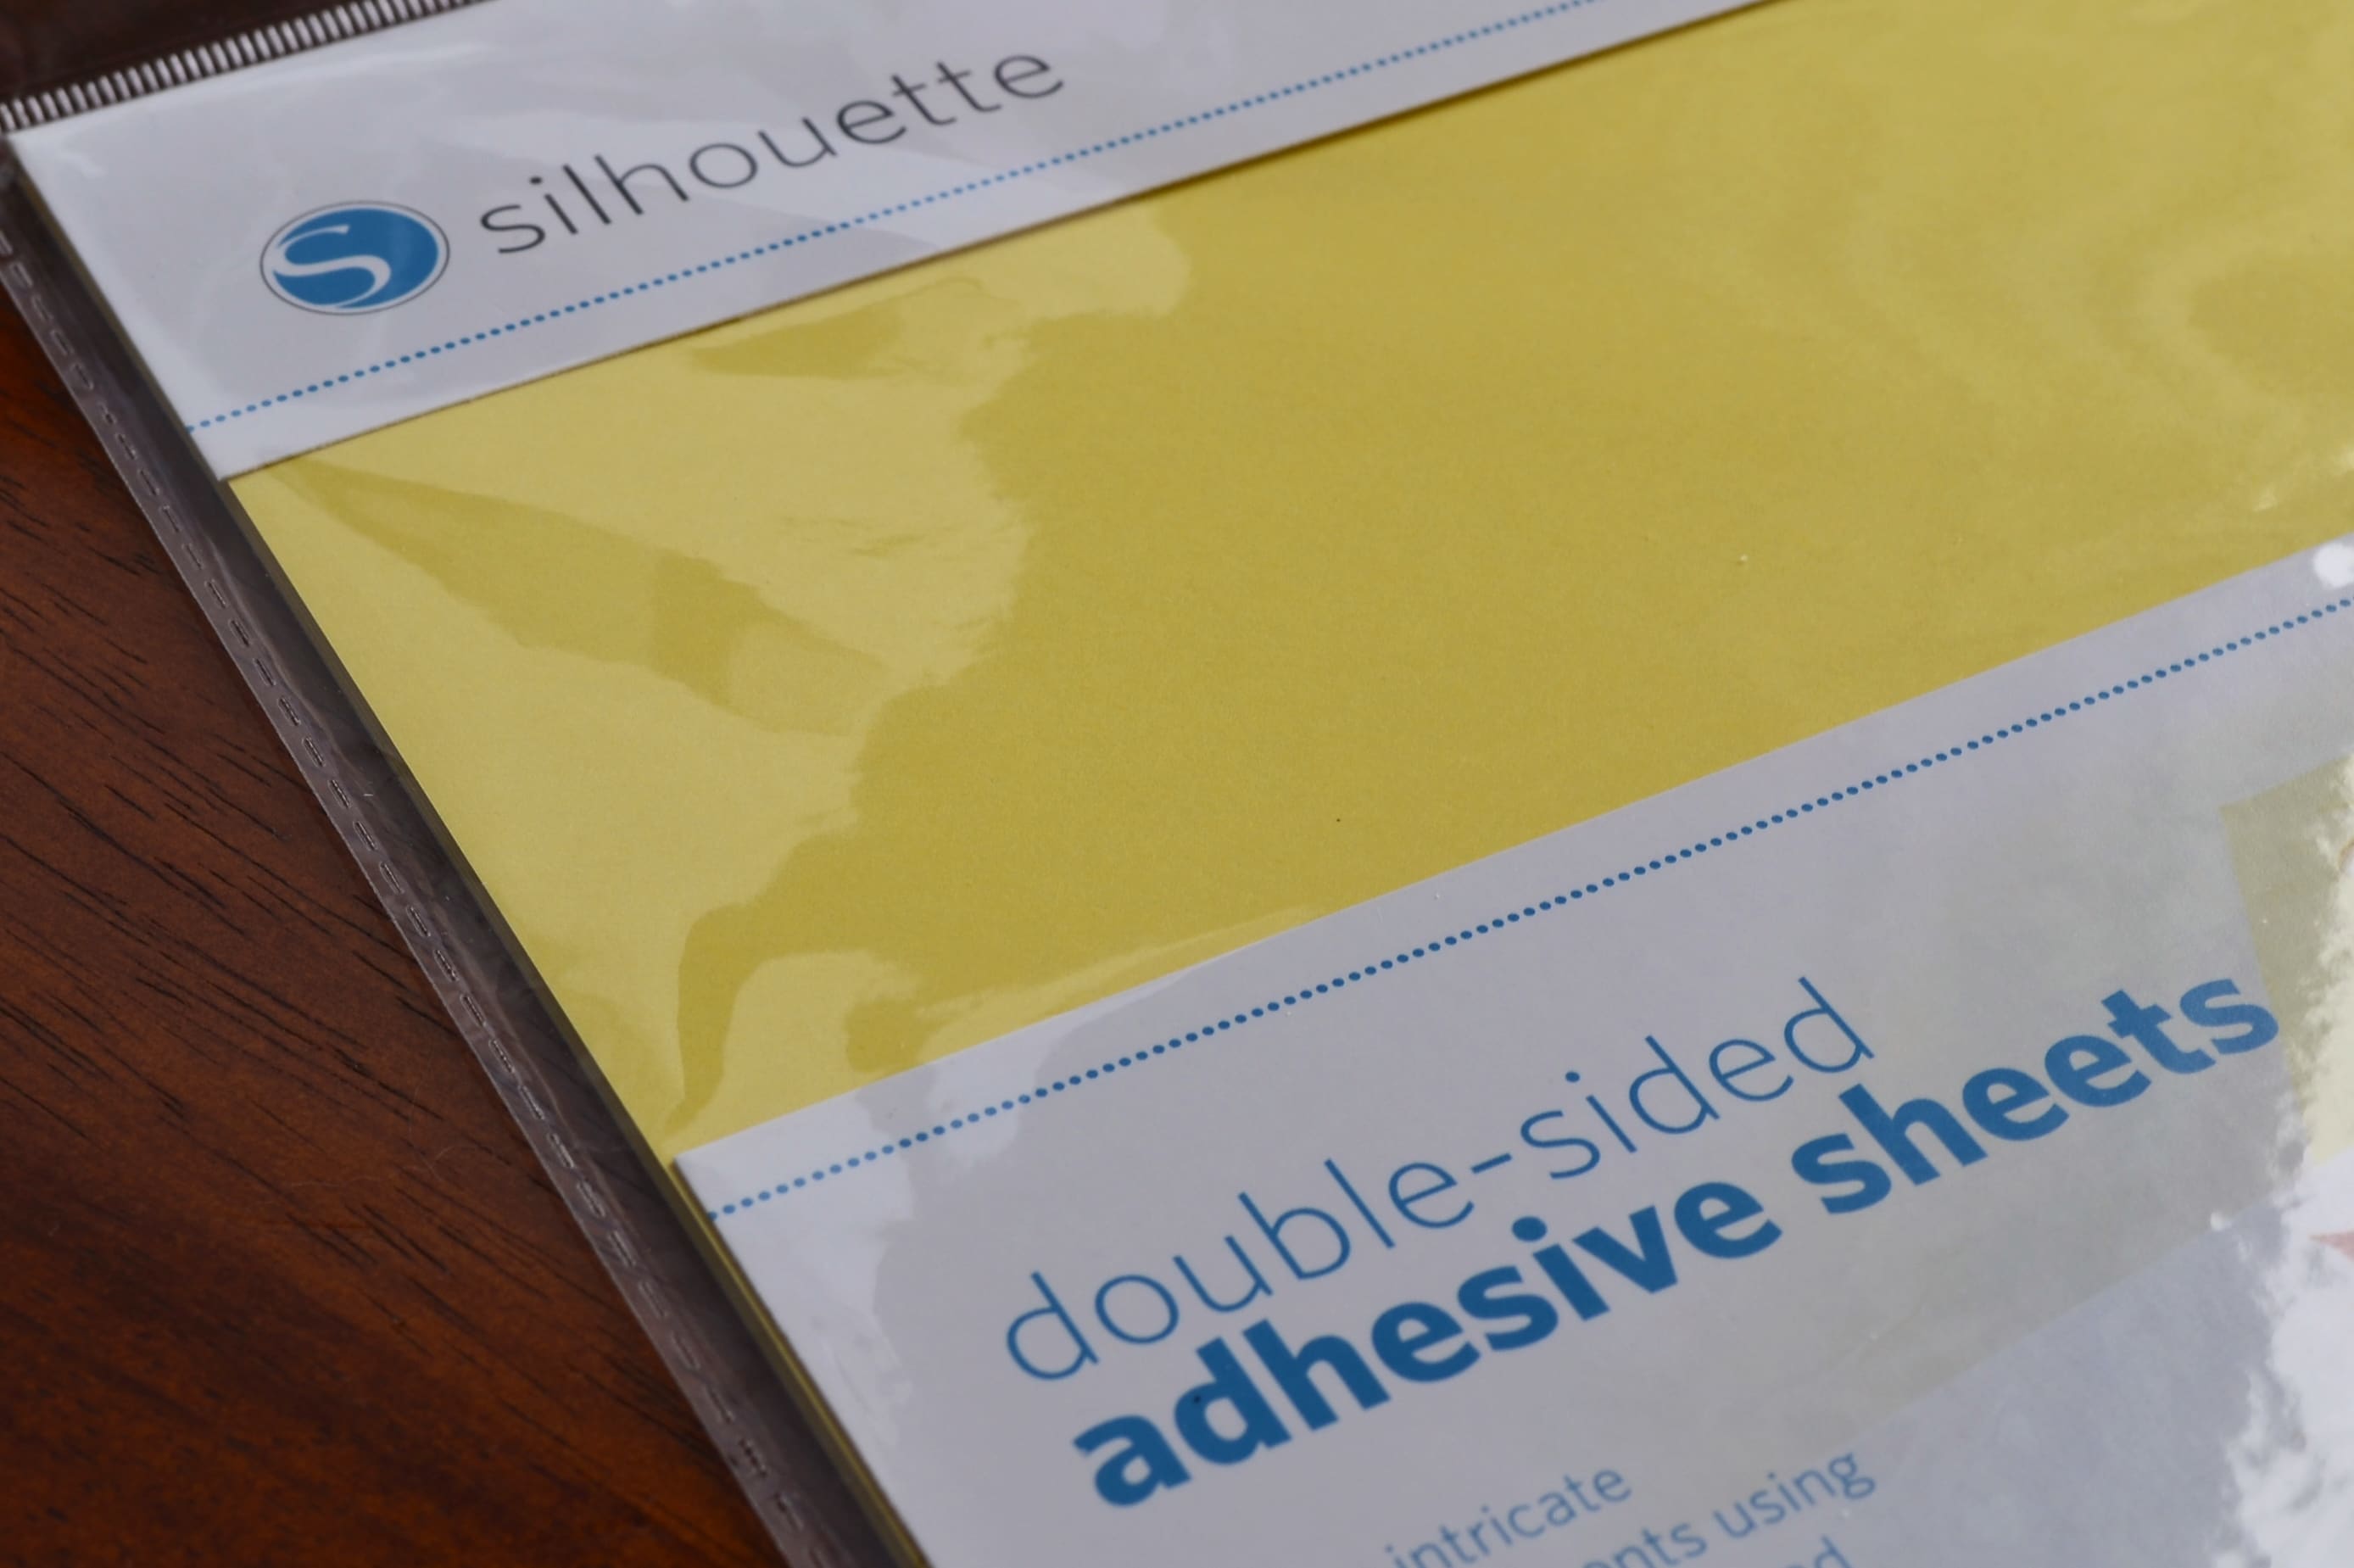 double sided adhesive sheets